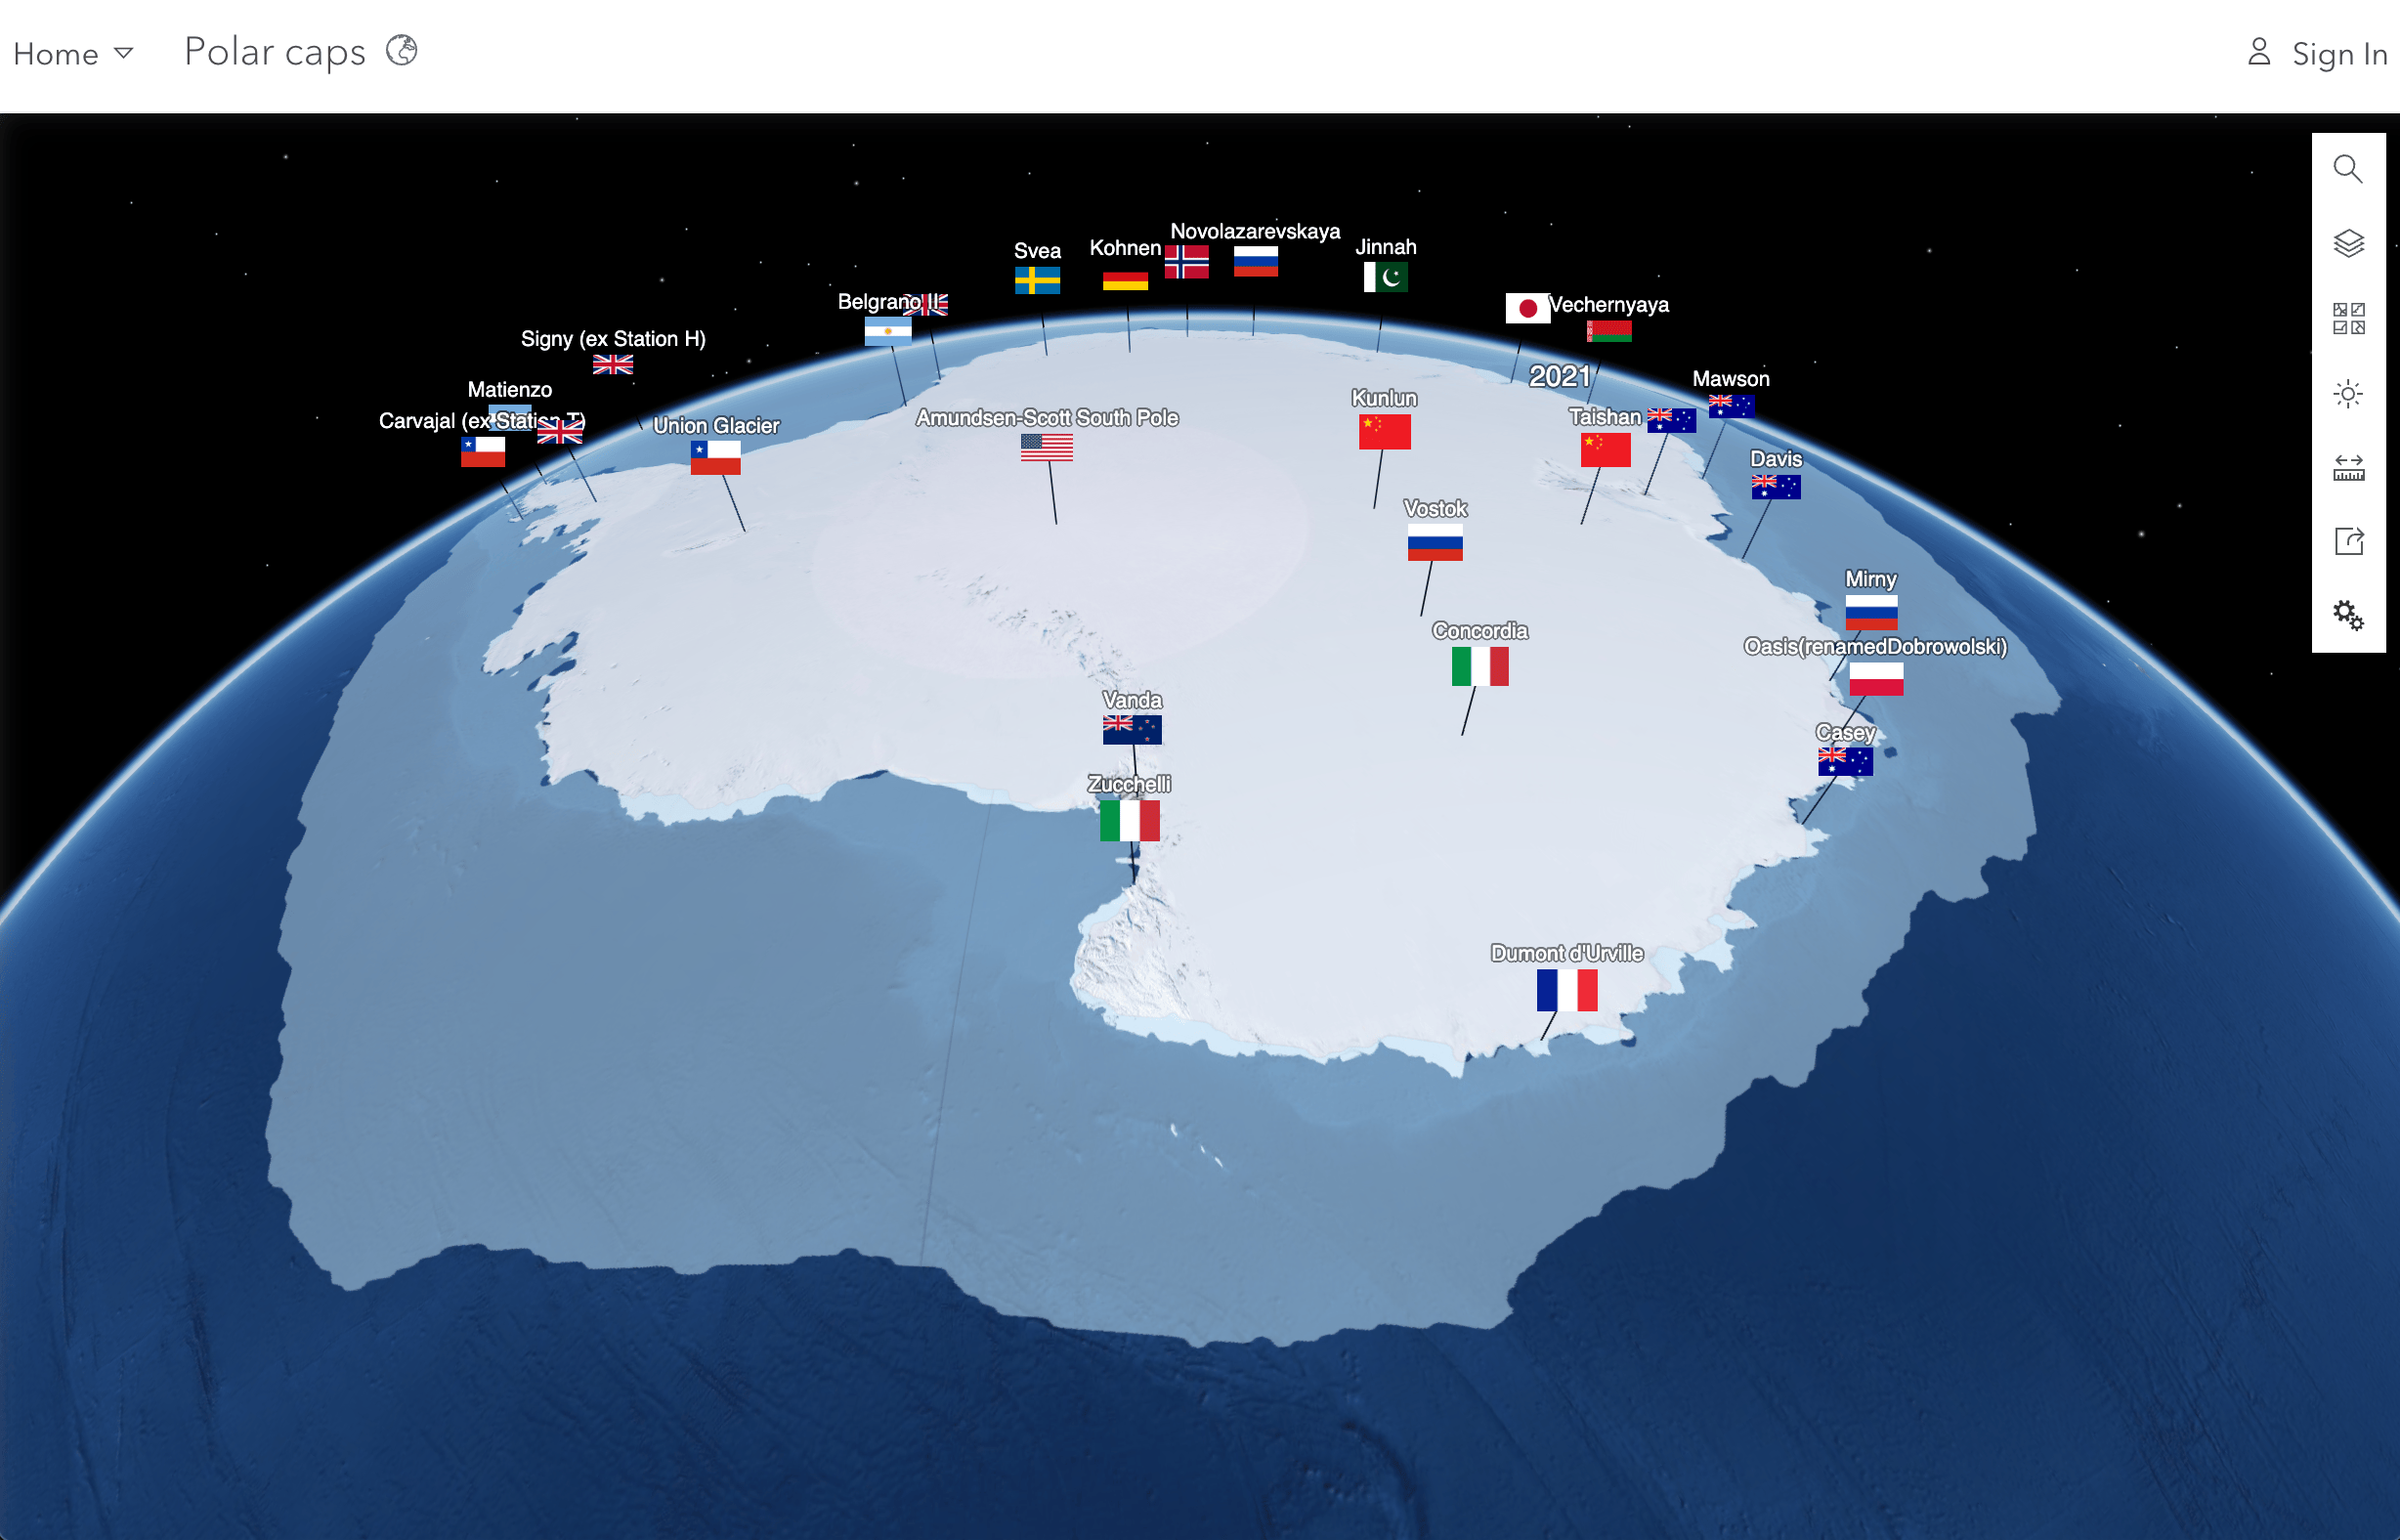 Visualize the research data from those stations in Antarctica without casting shadows